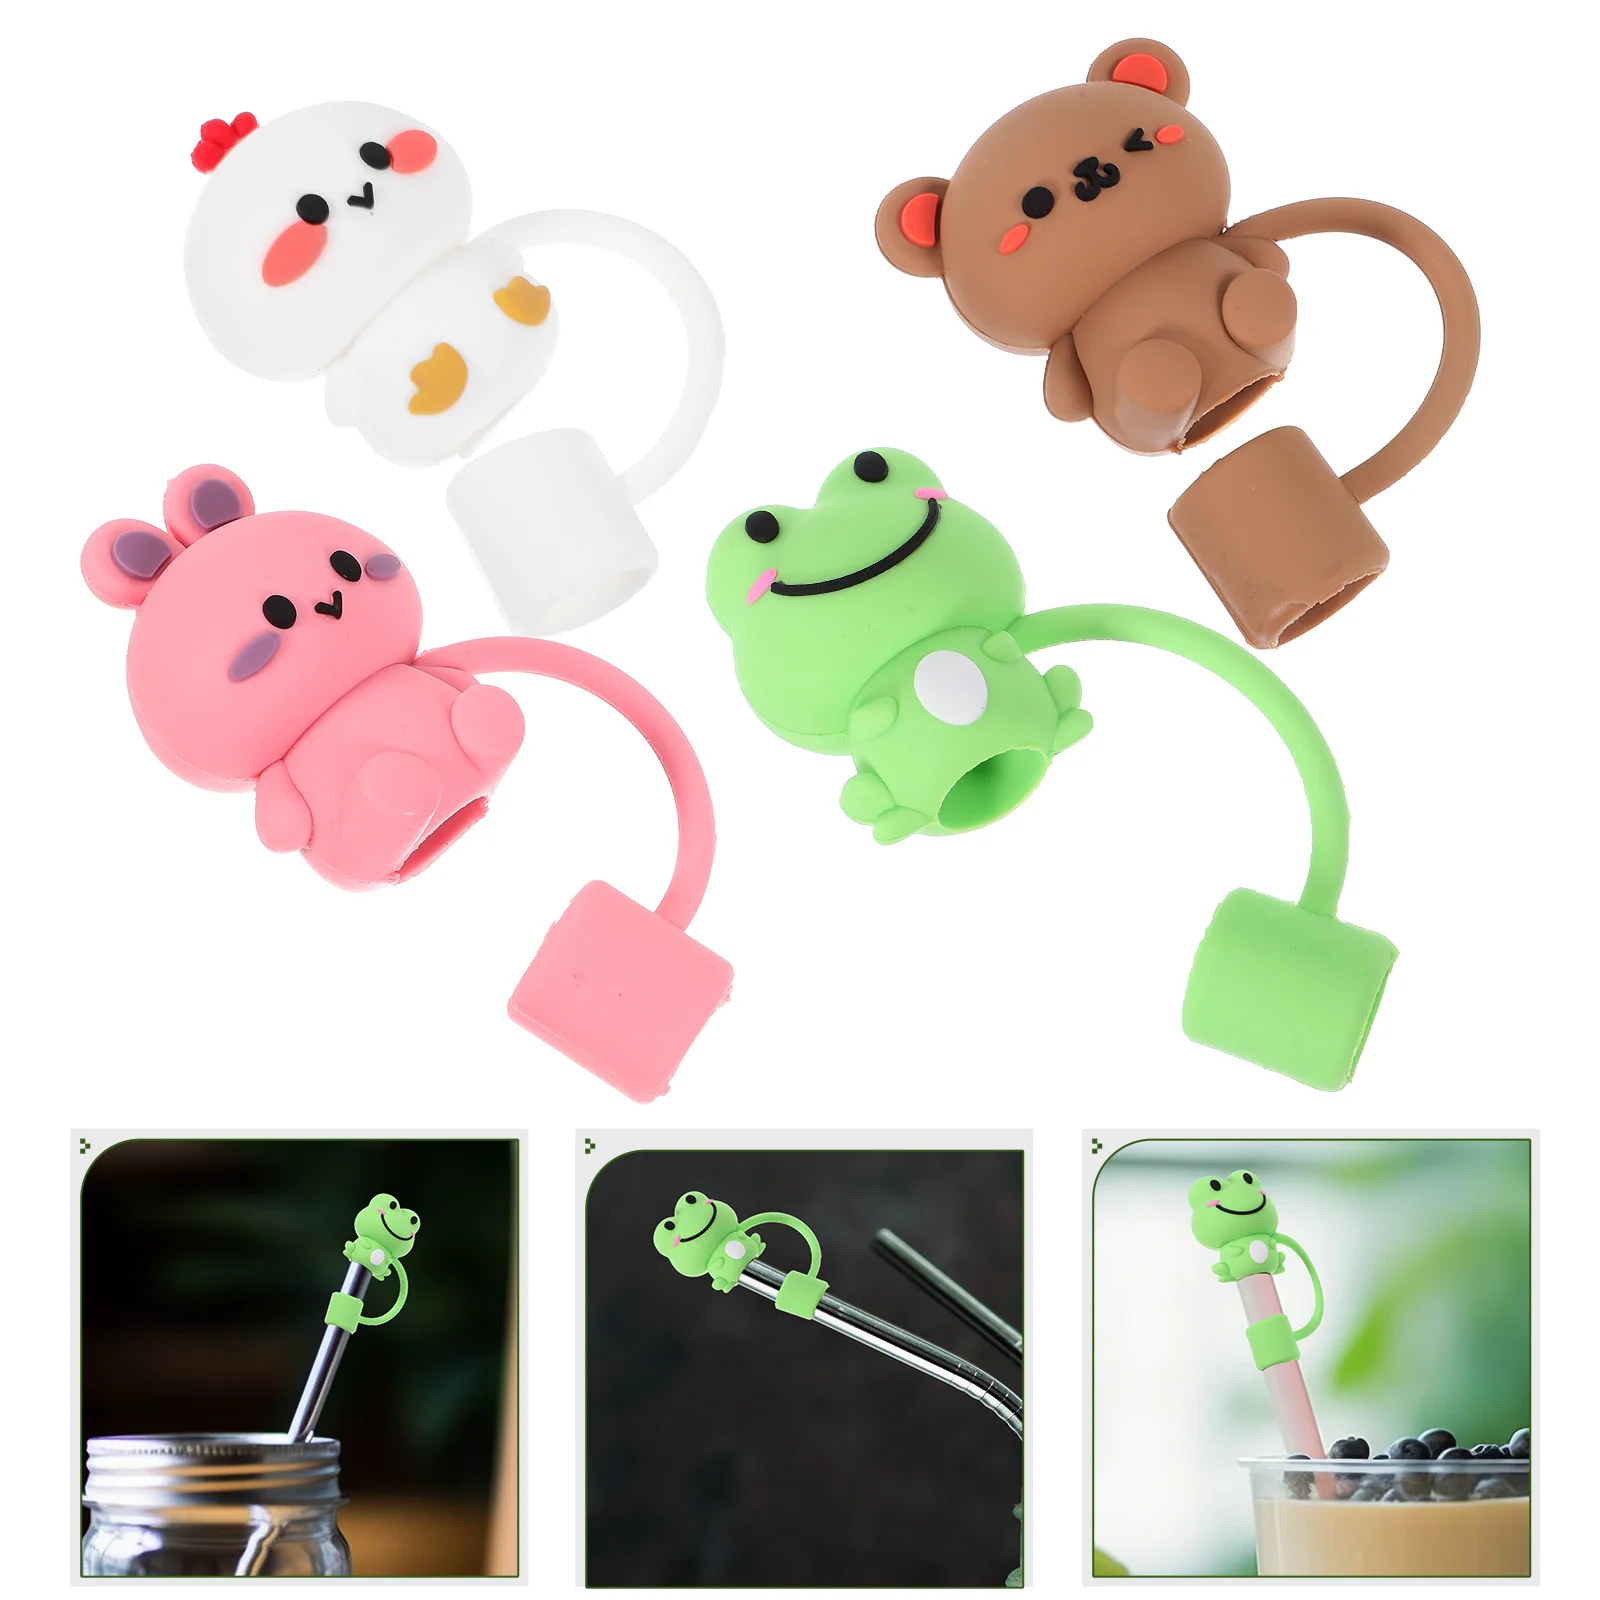 

4 Pcs Animal Straw Plugs Frog Tips Protector Covers Cap Dust-proof Supplies Silicone Silica Gel Topper Drinking Caps